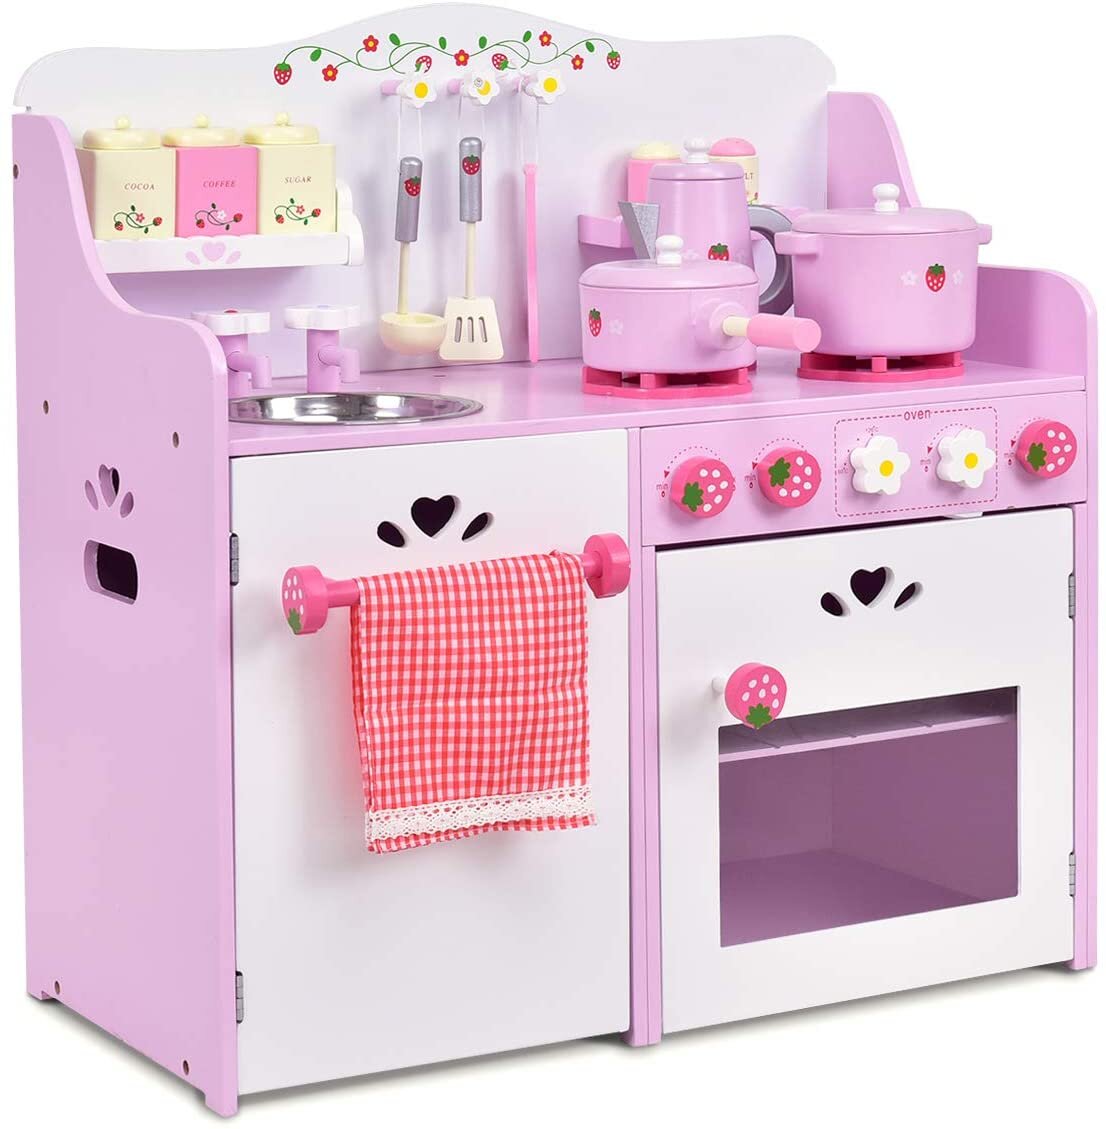 Kids Pretend Cooking Playset Kitchen Toys Cookware Play Set Toddler Child Gift 